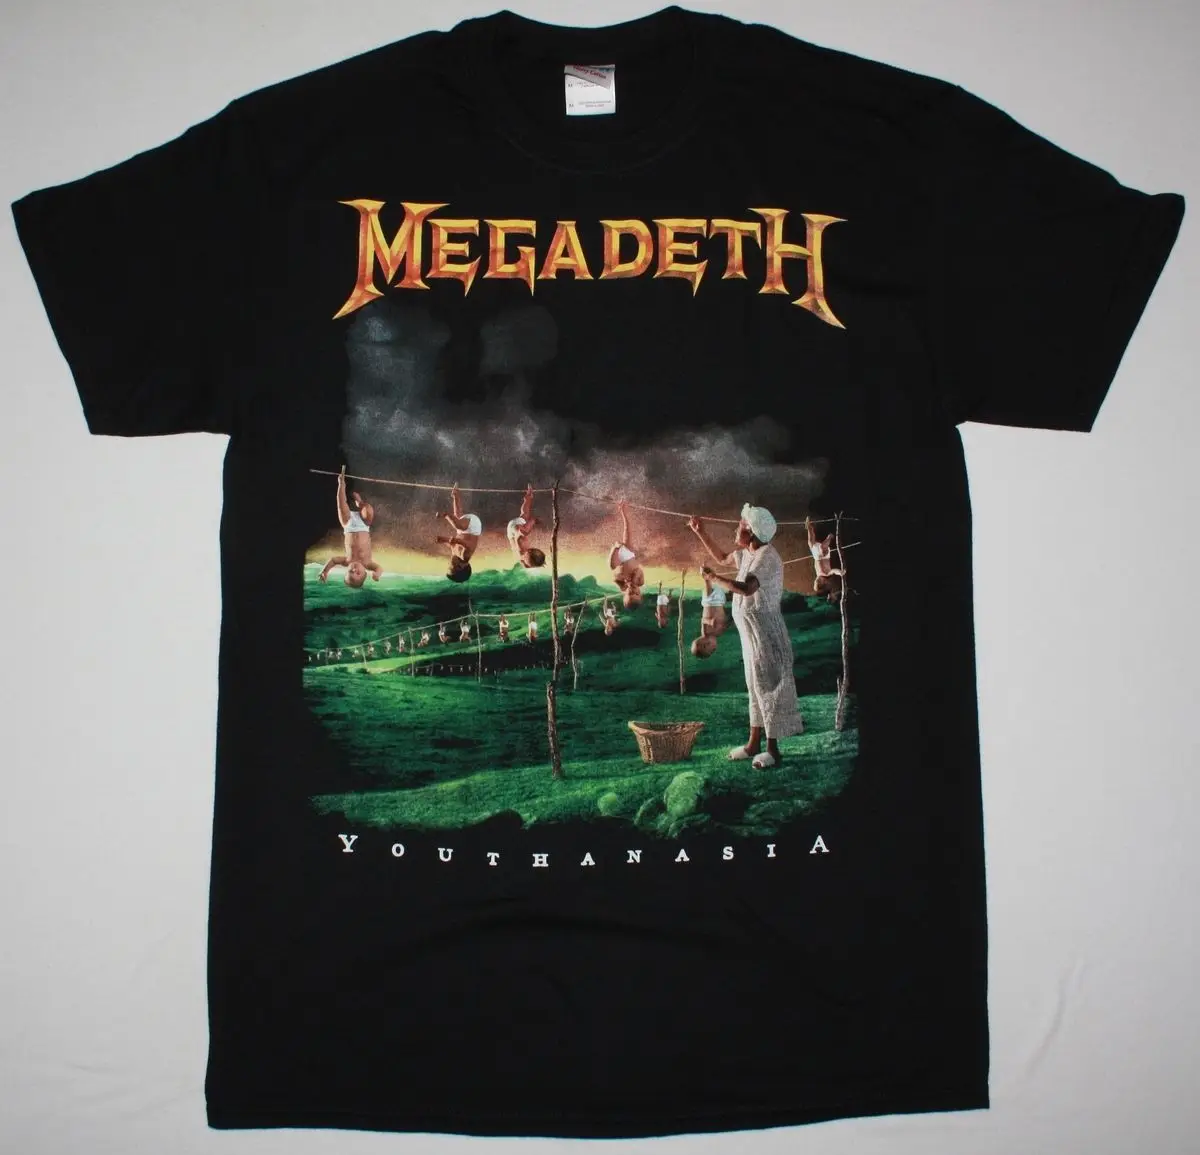 MEGADETH YOUTHANASIA DAVE MUSTAINE HEAVY METAL METALLICA NEW BLACK T